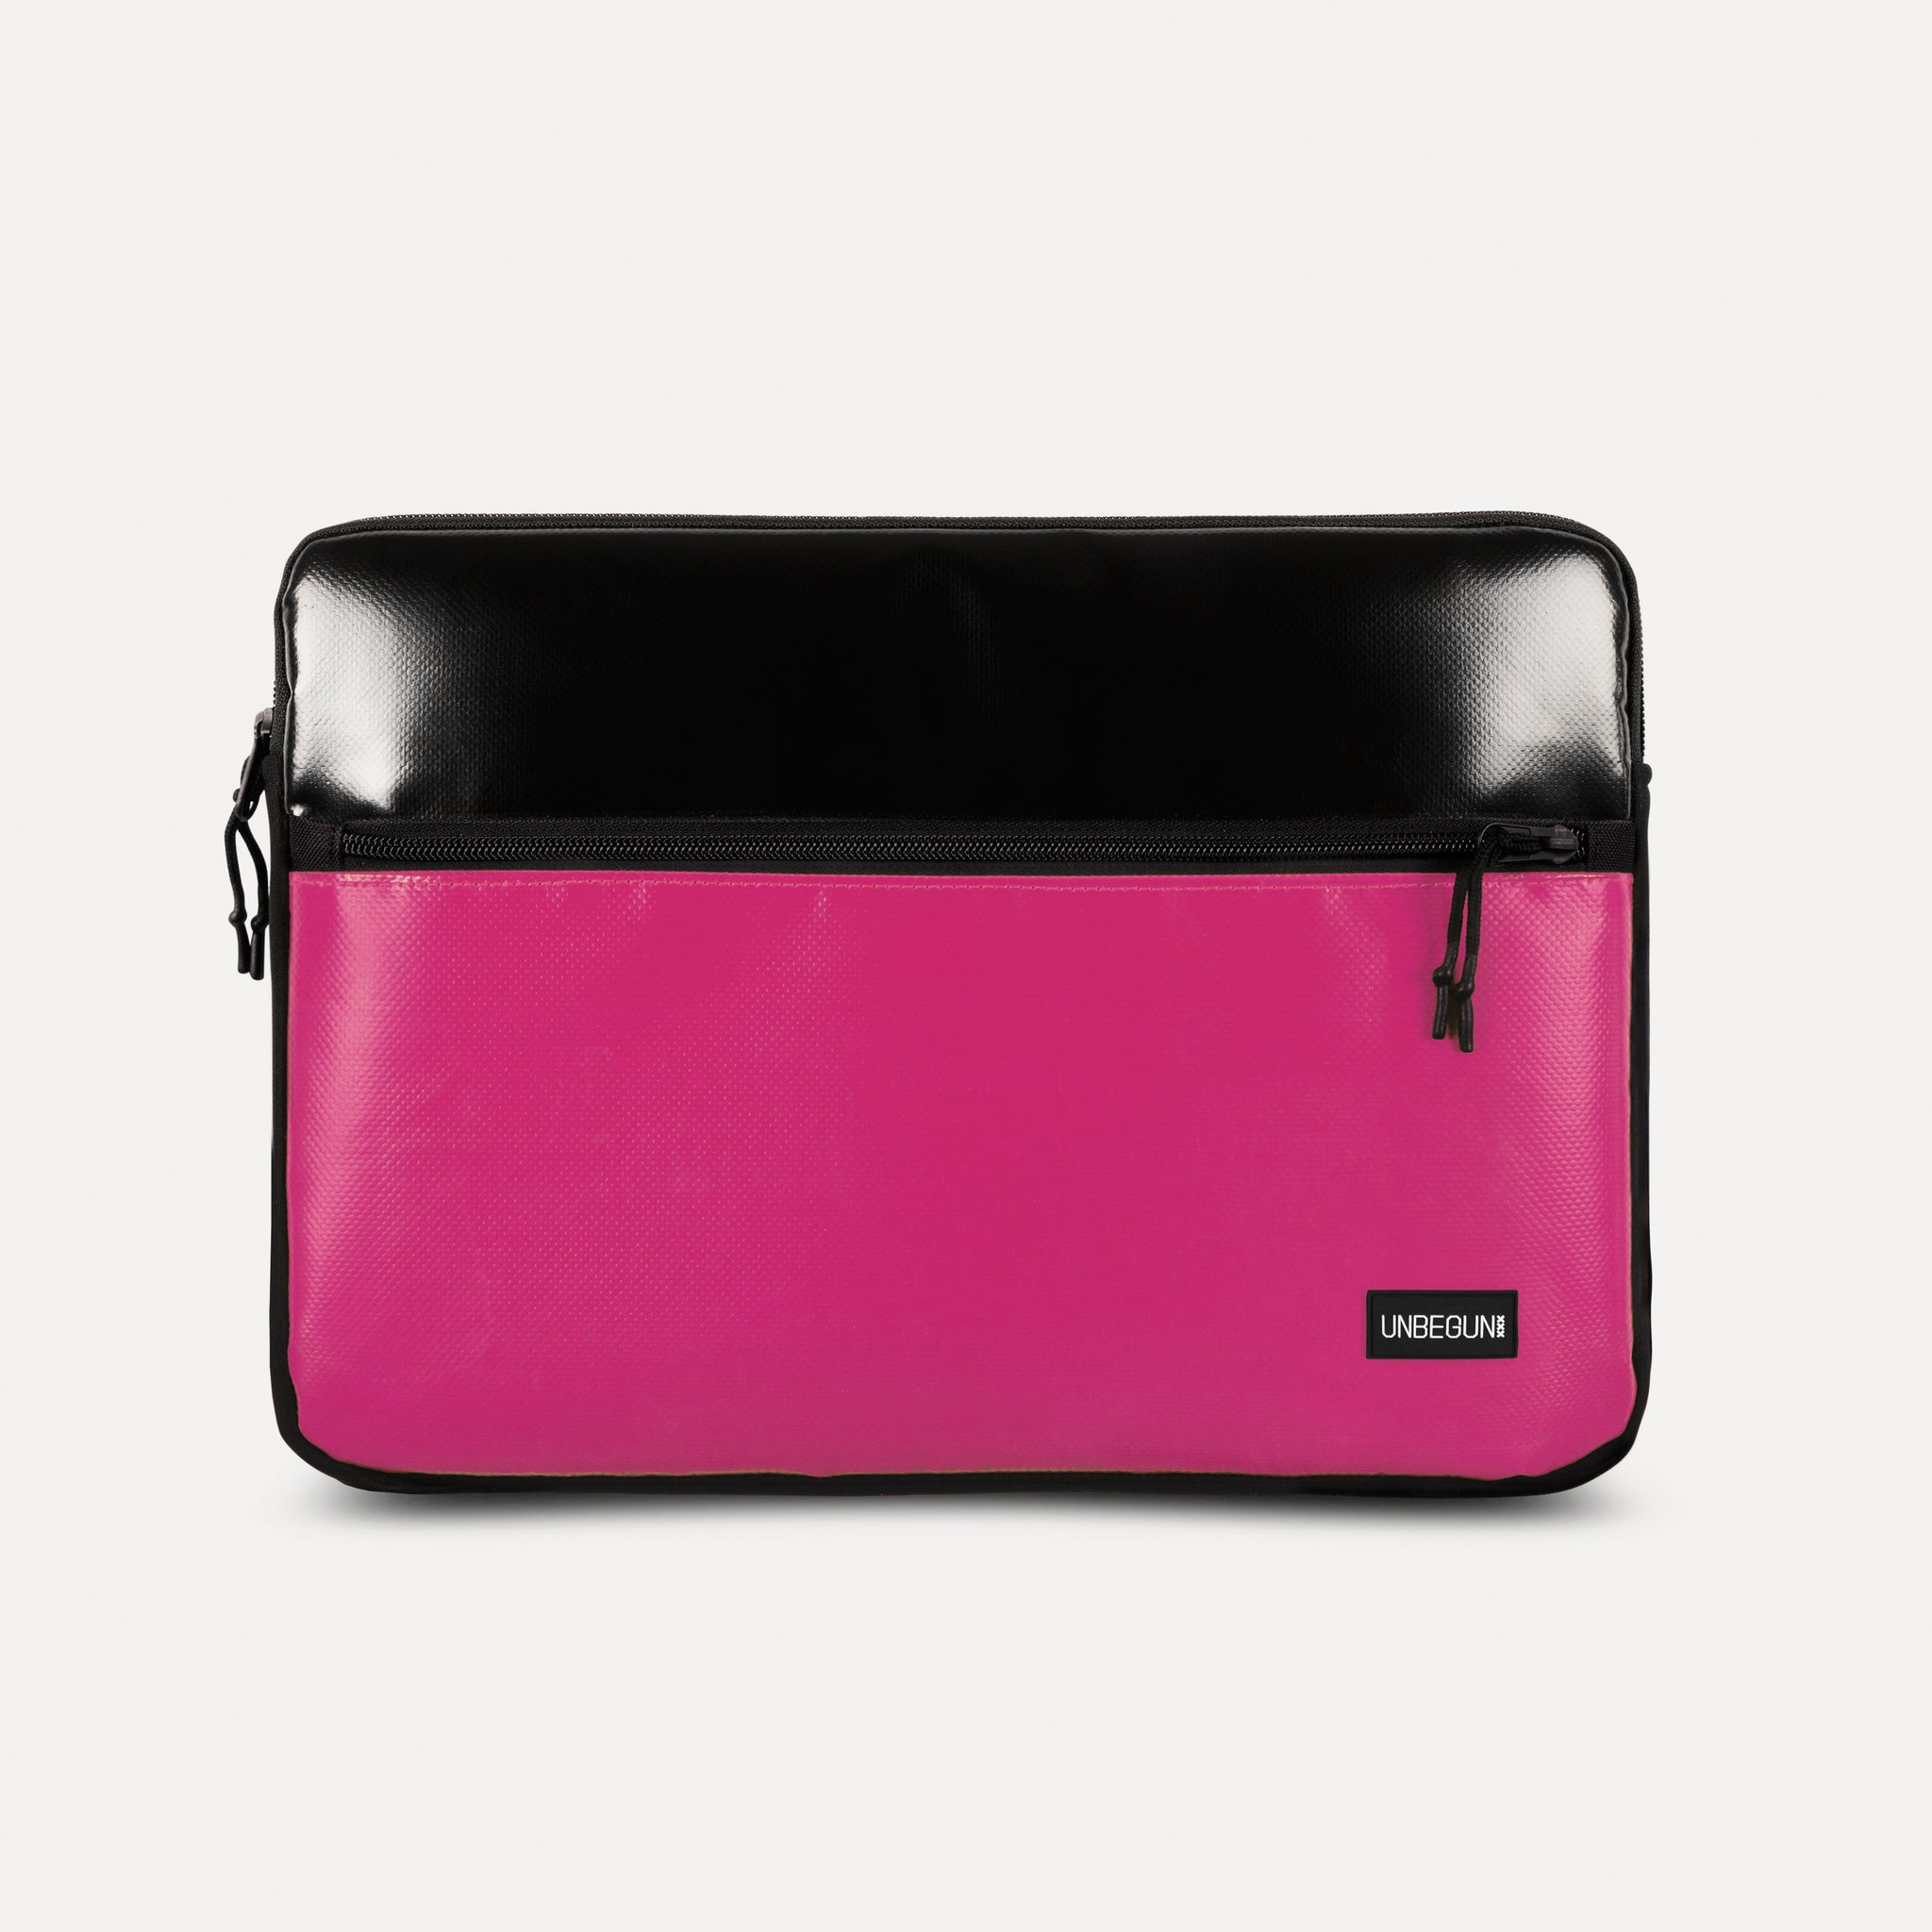 LAPTOP CASE WITH FRONT COMPARTMENT (BLACK/PINK)